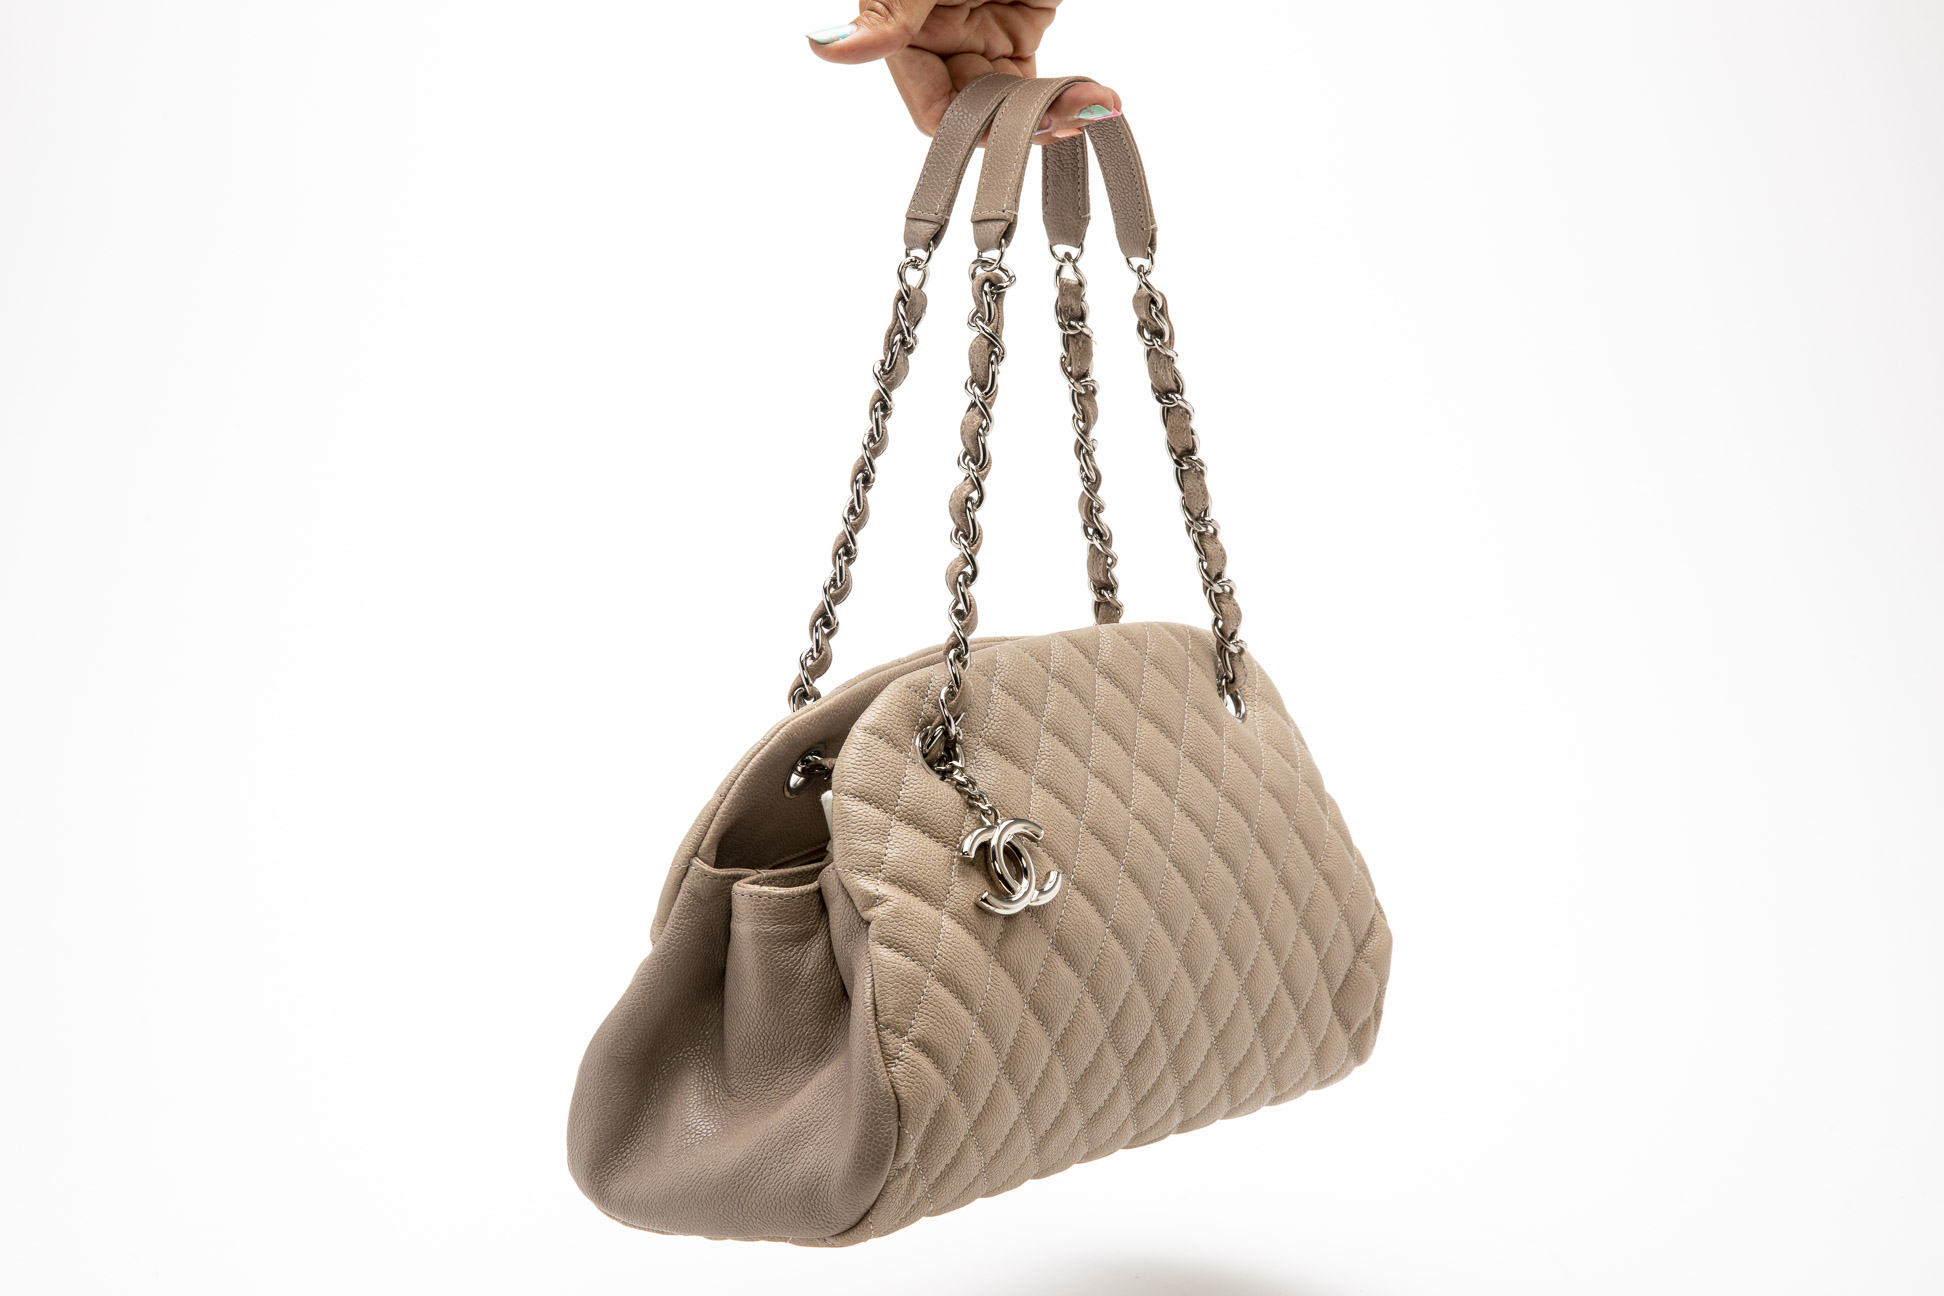 A CHANEL "JUST MADEMOISELLE" BOWLING BAG - Image 5 of 5